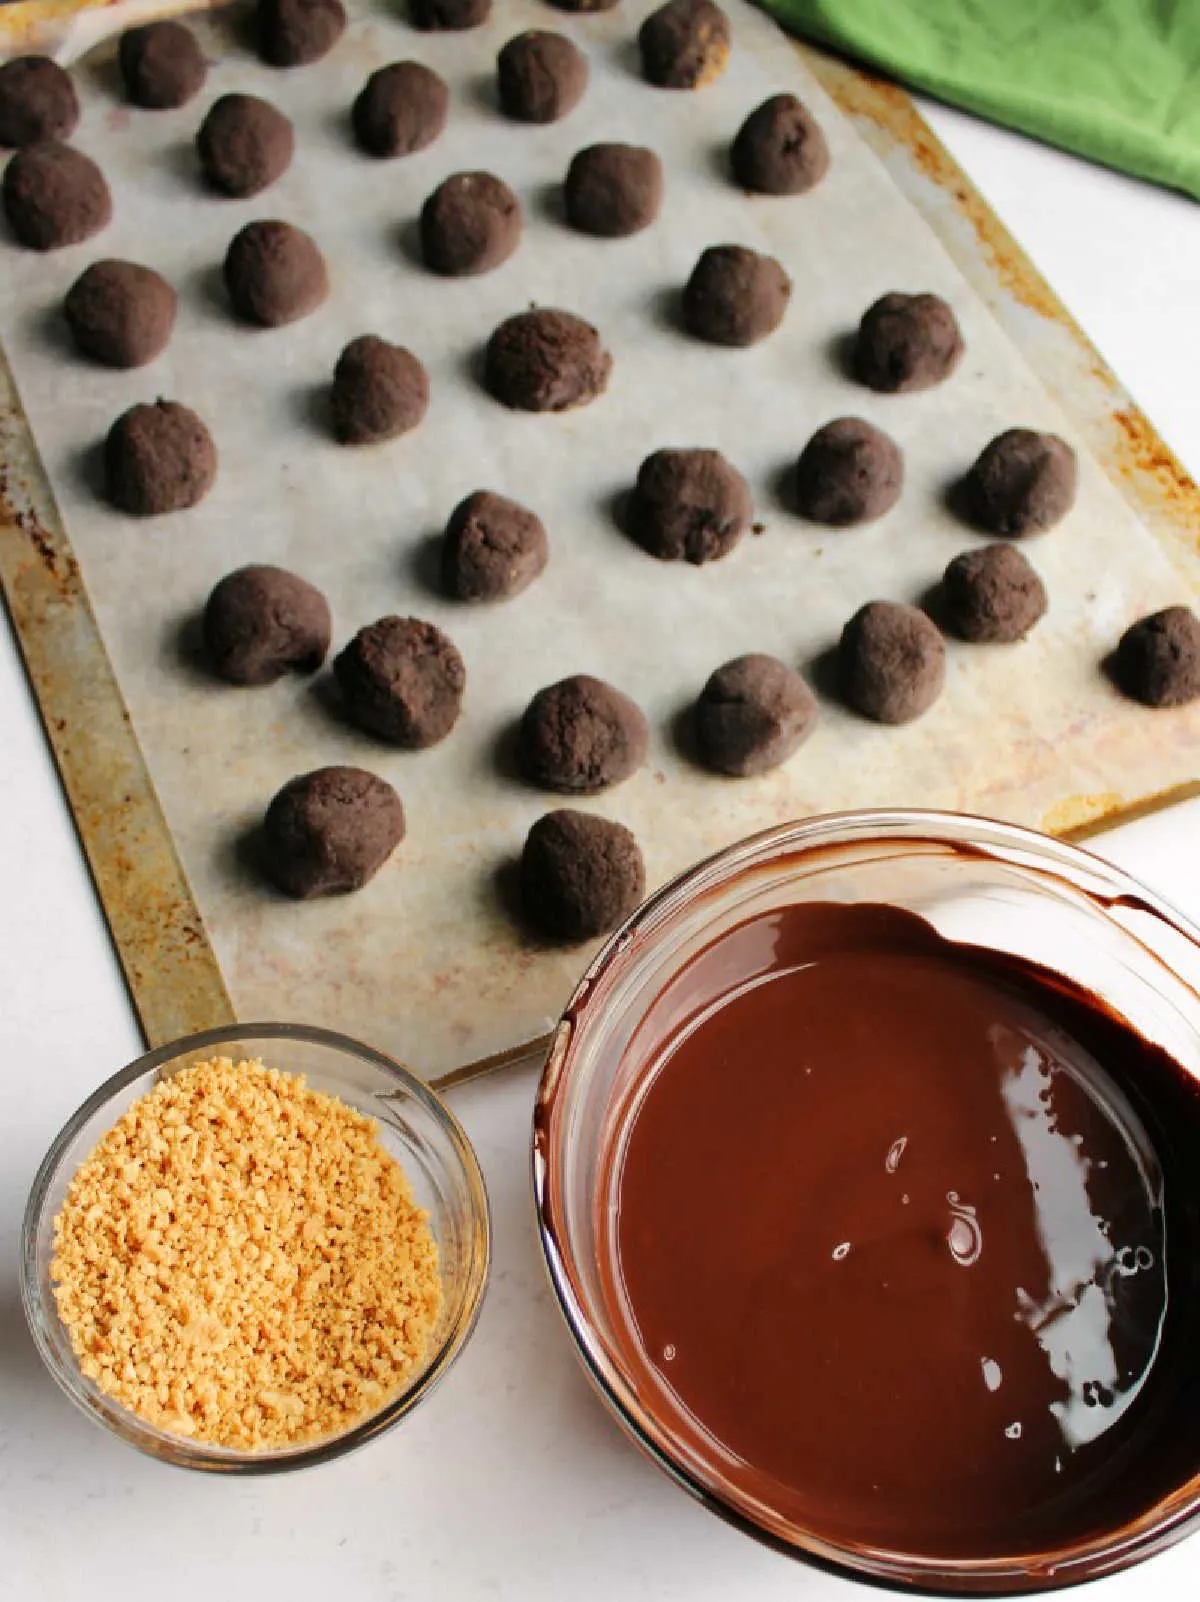 peanut butter oreo balls ready to be dipped in chocolate.